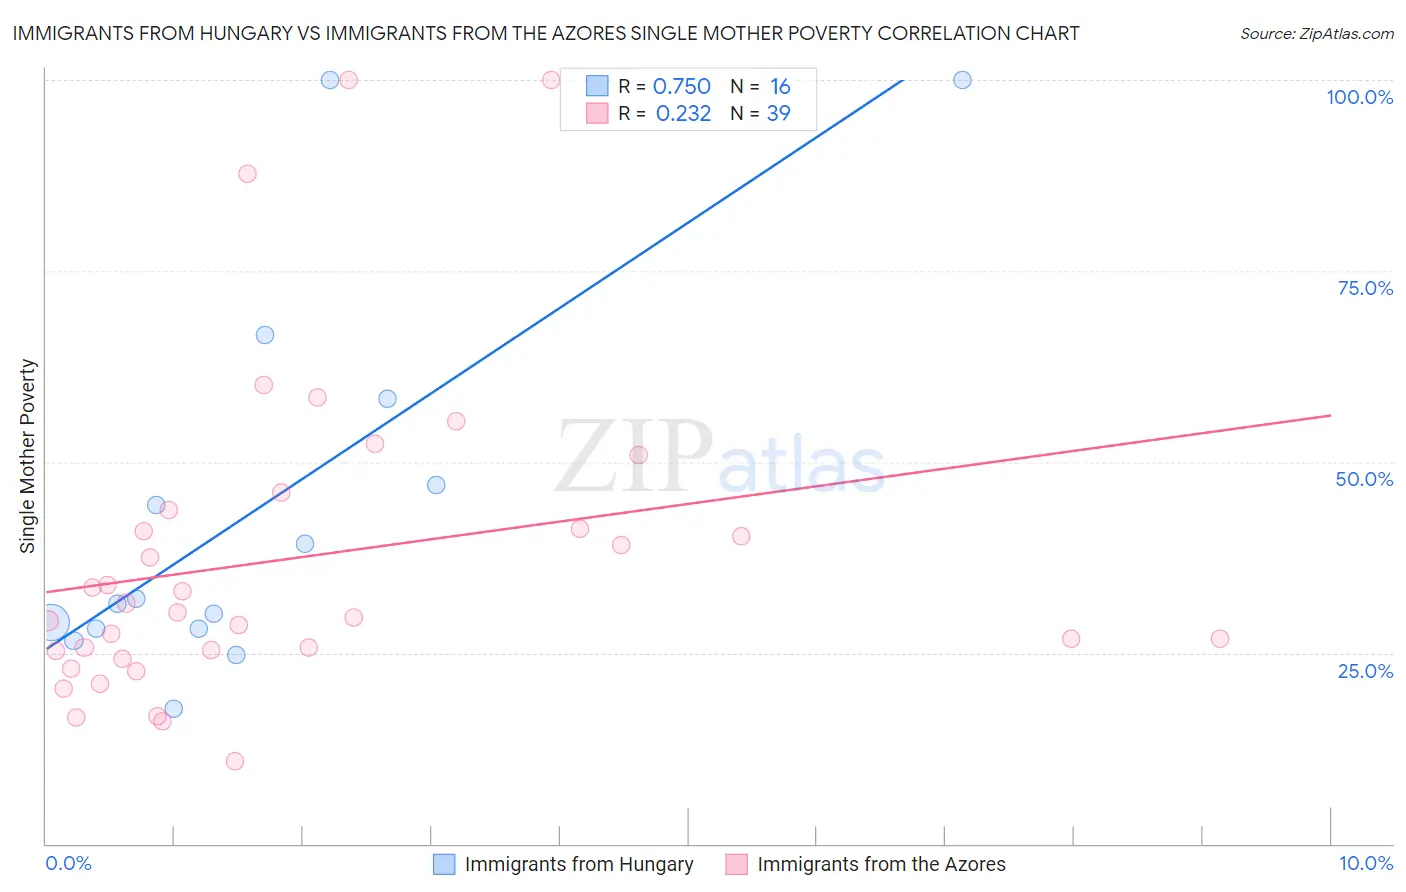 Immigrants from Hungary vs Immigrants from the Azores Single Mother Poverty